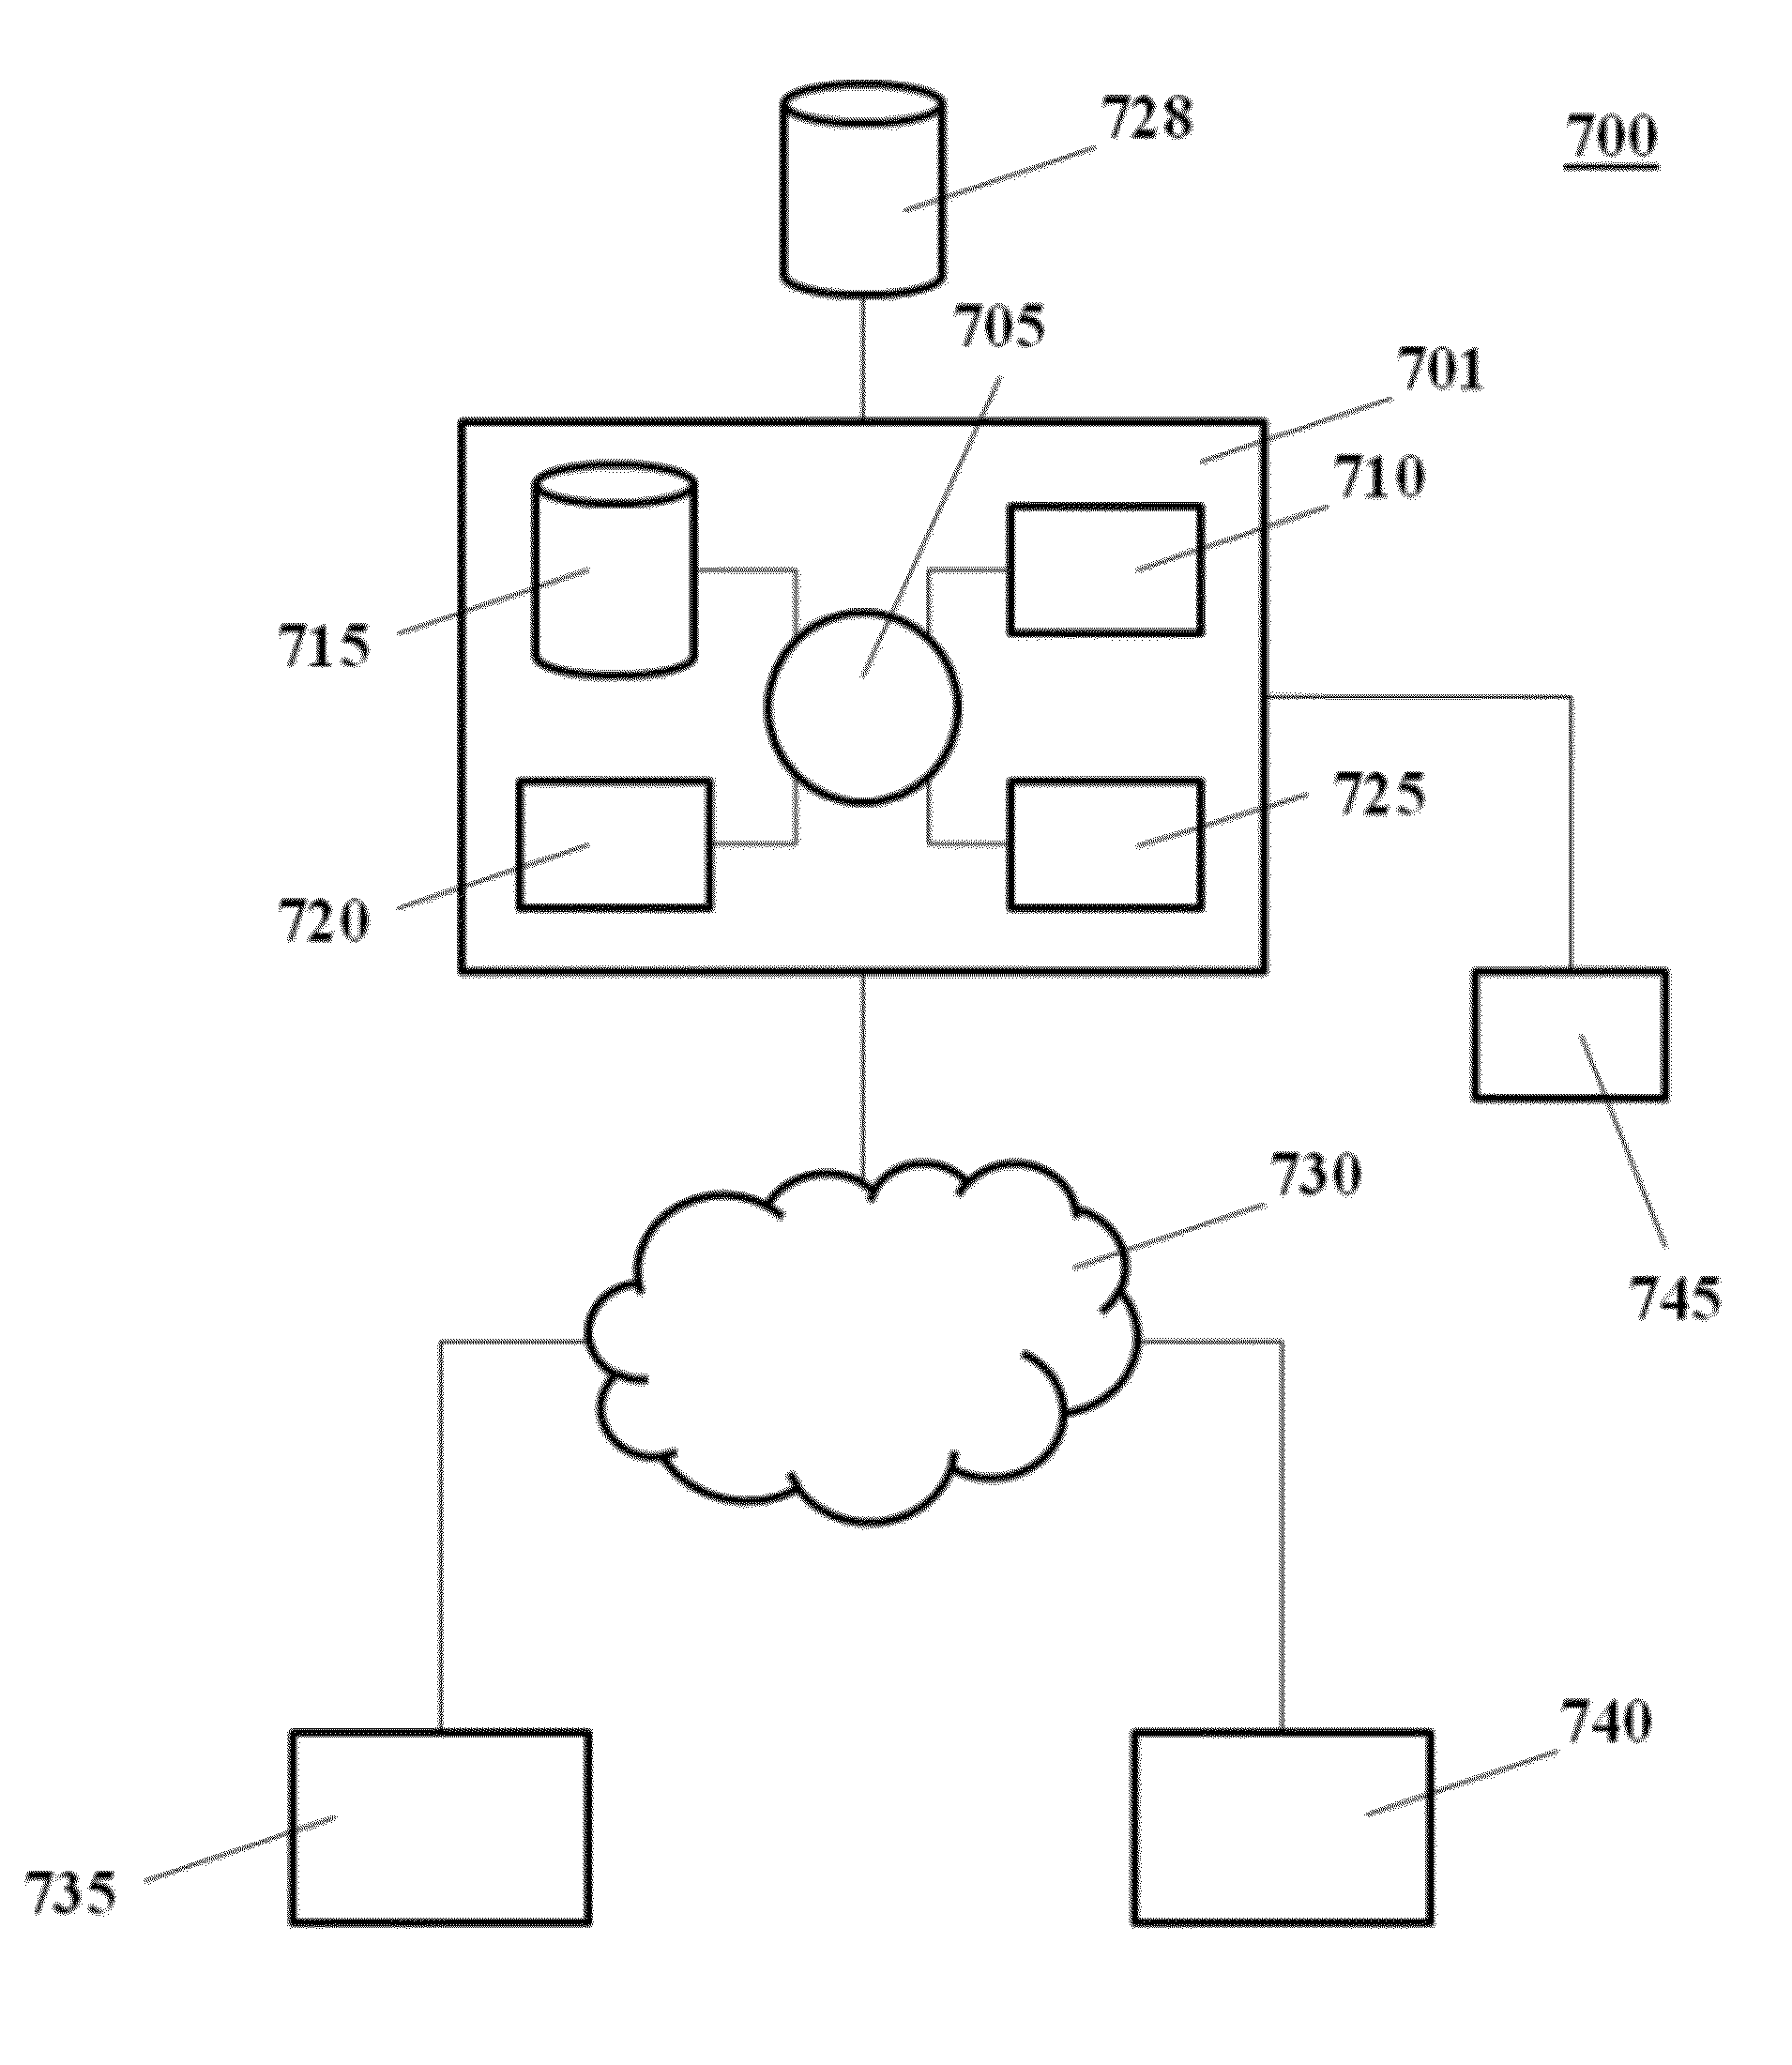 Systems and methods for importing media file email attachments